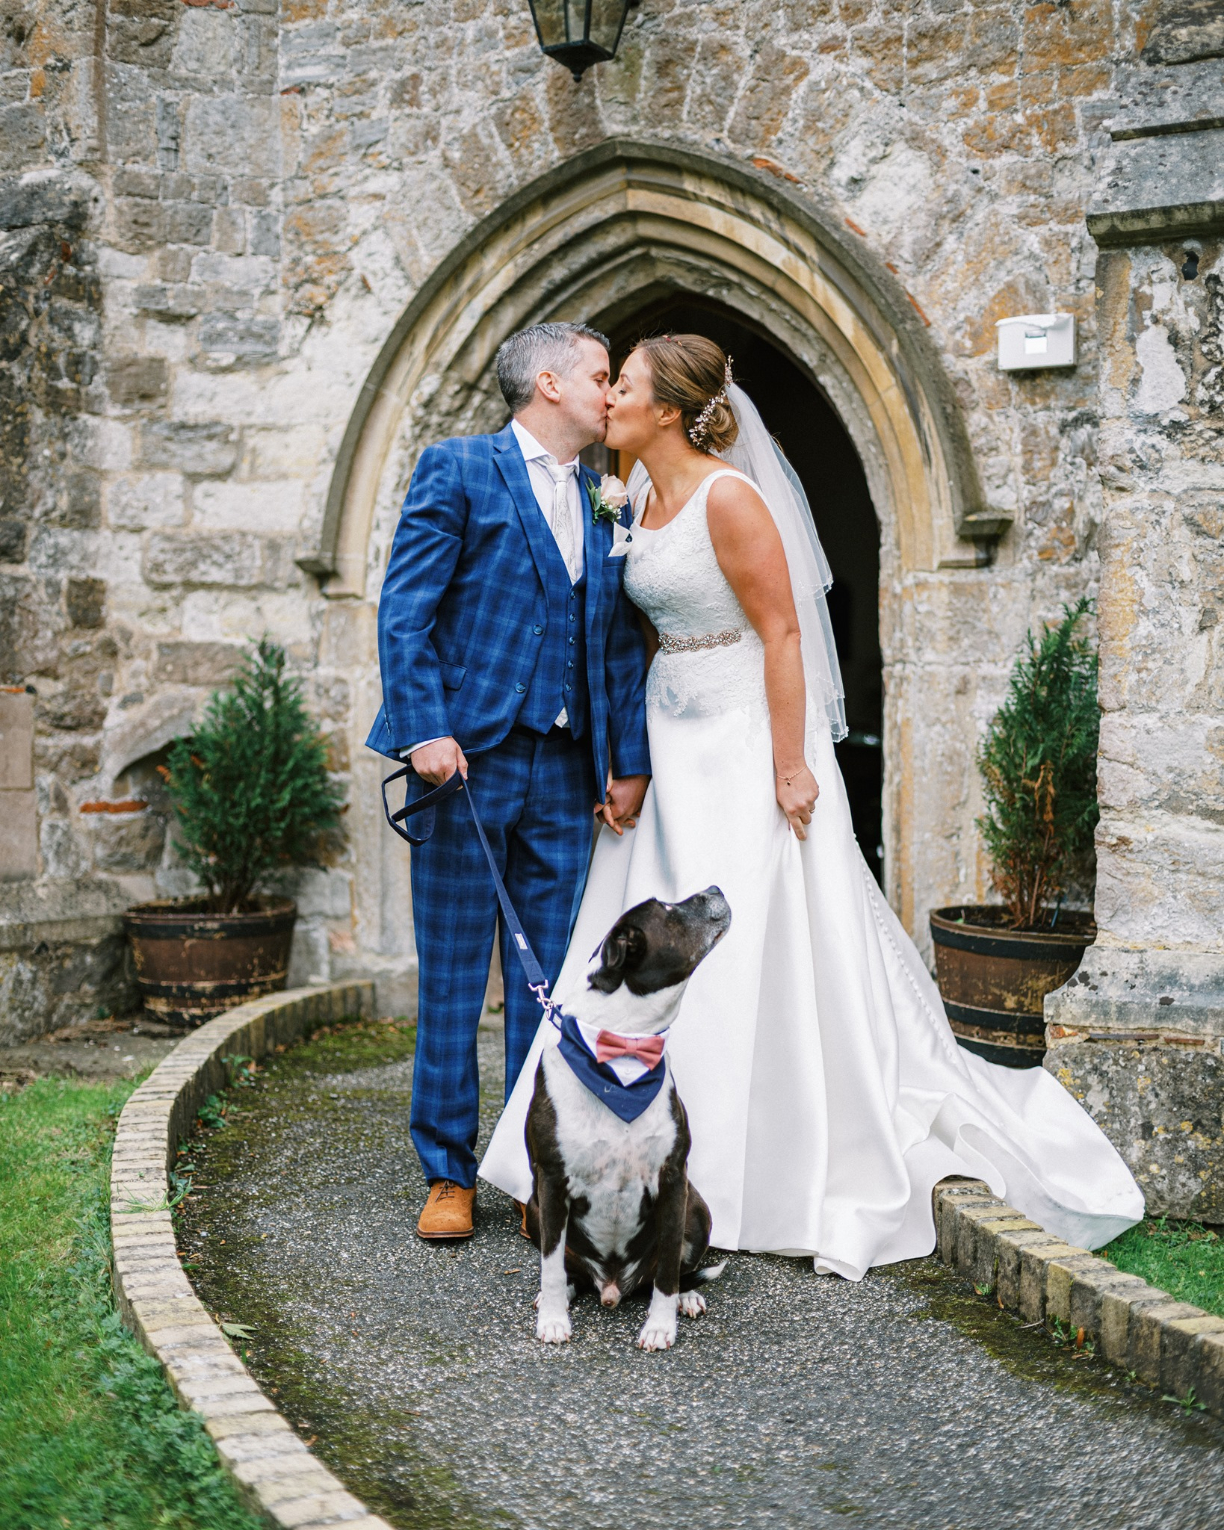 Wedding with a dog provided by The Grange Retreat in Essex